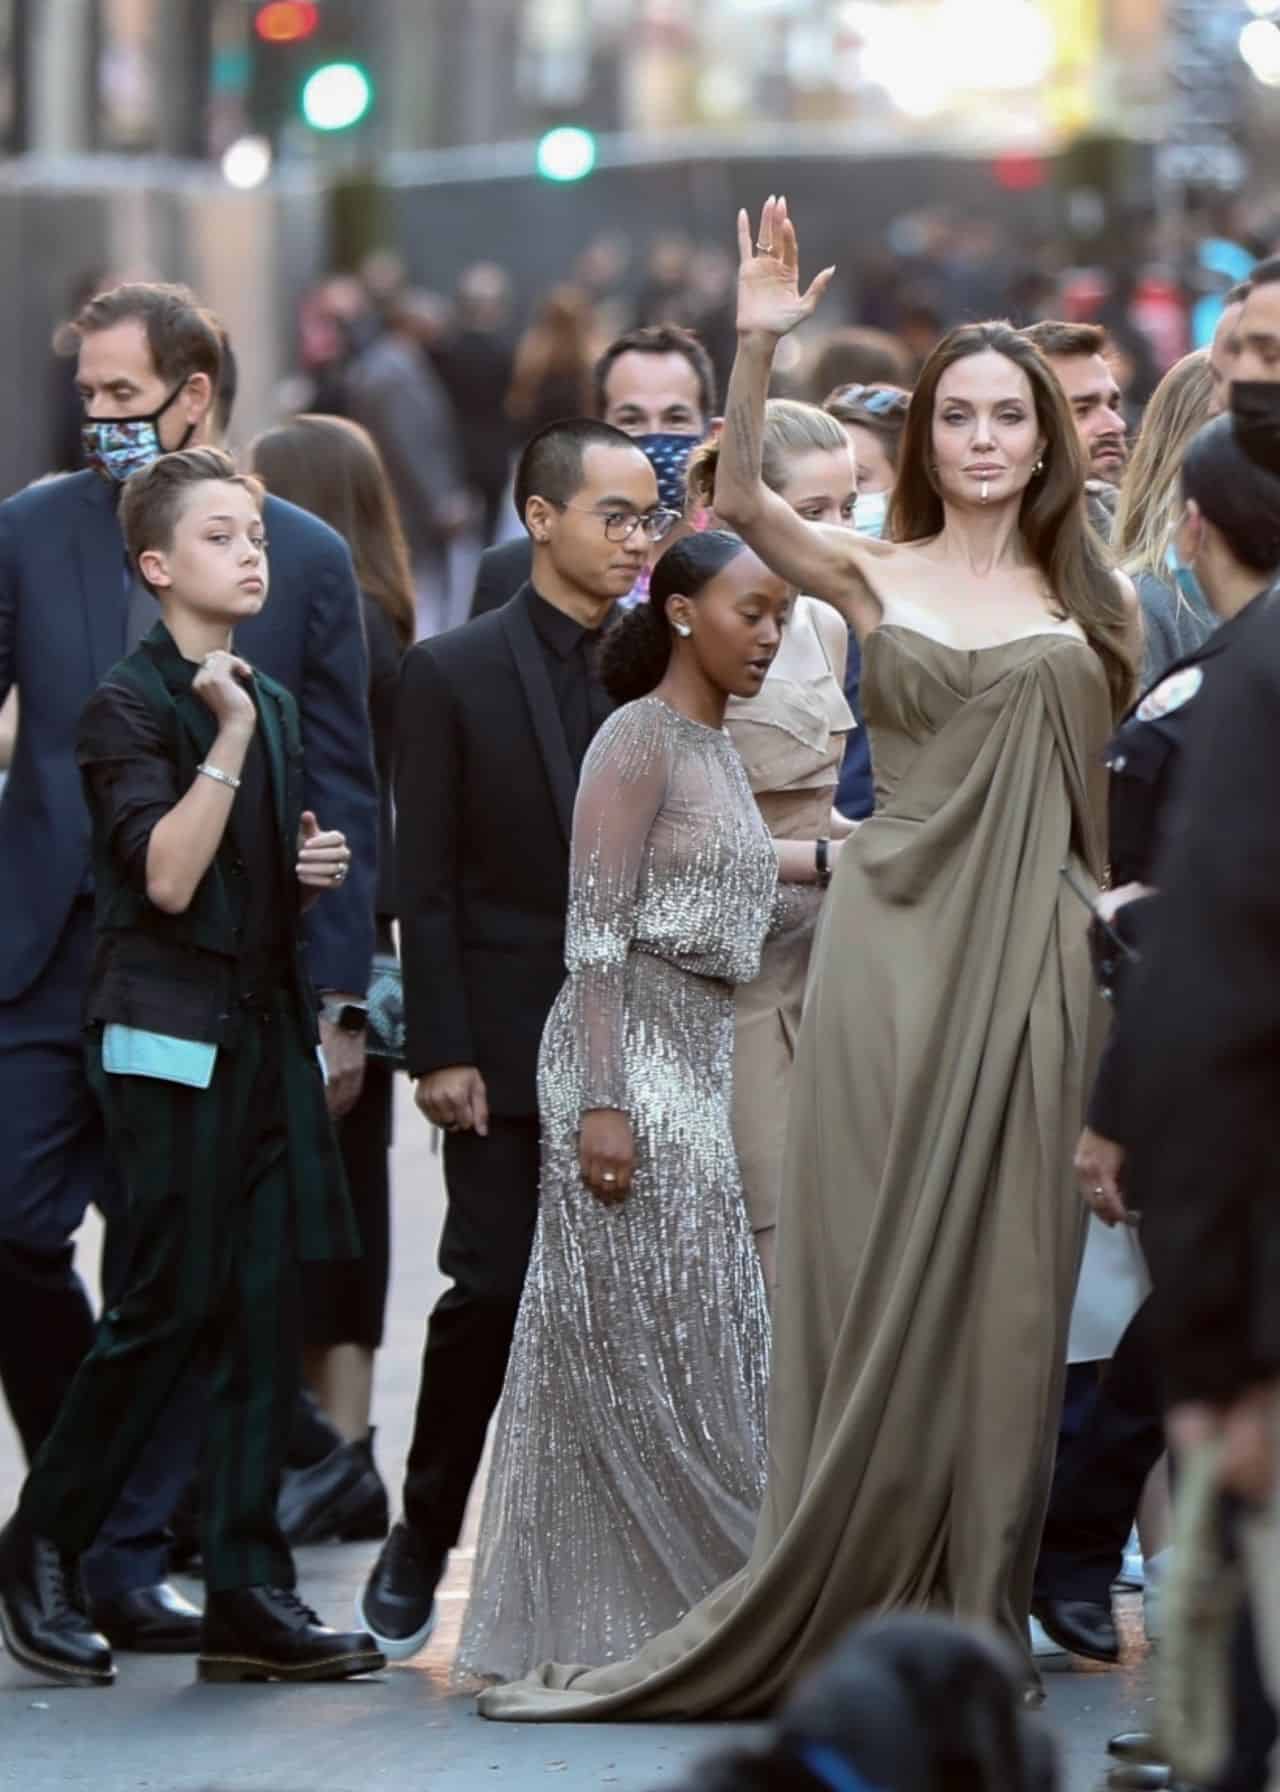 Angelina Jolie and her Kids Attend the Premiere of “Eternals” in Hollywood